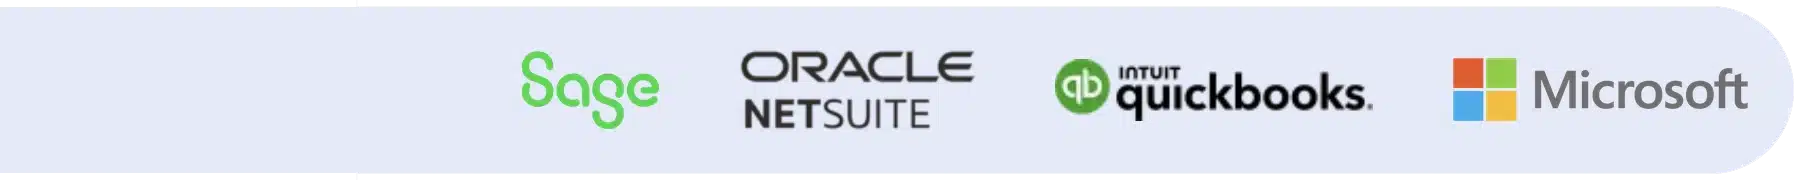 The logos of microsoft, oracle, and saas.